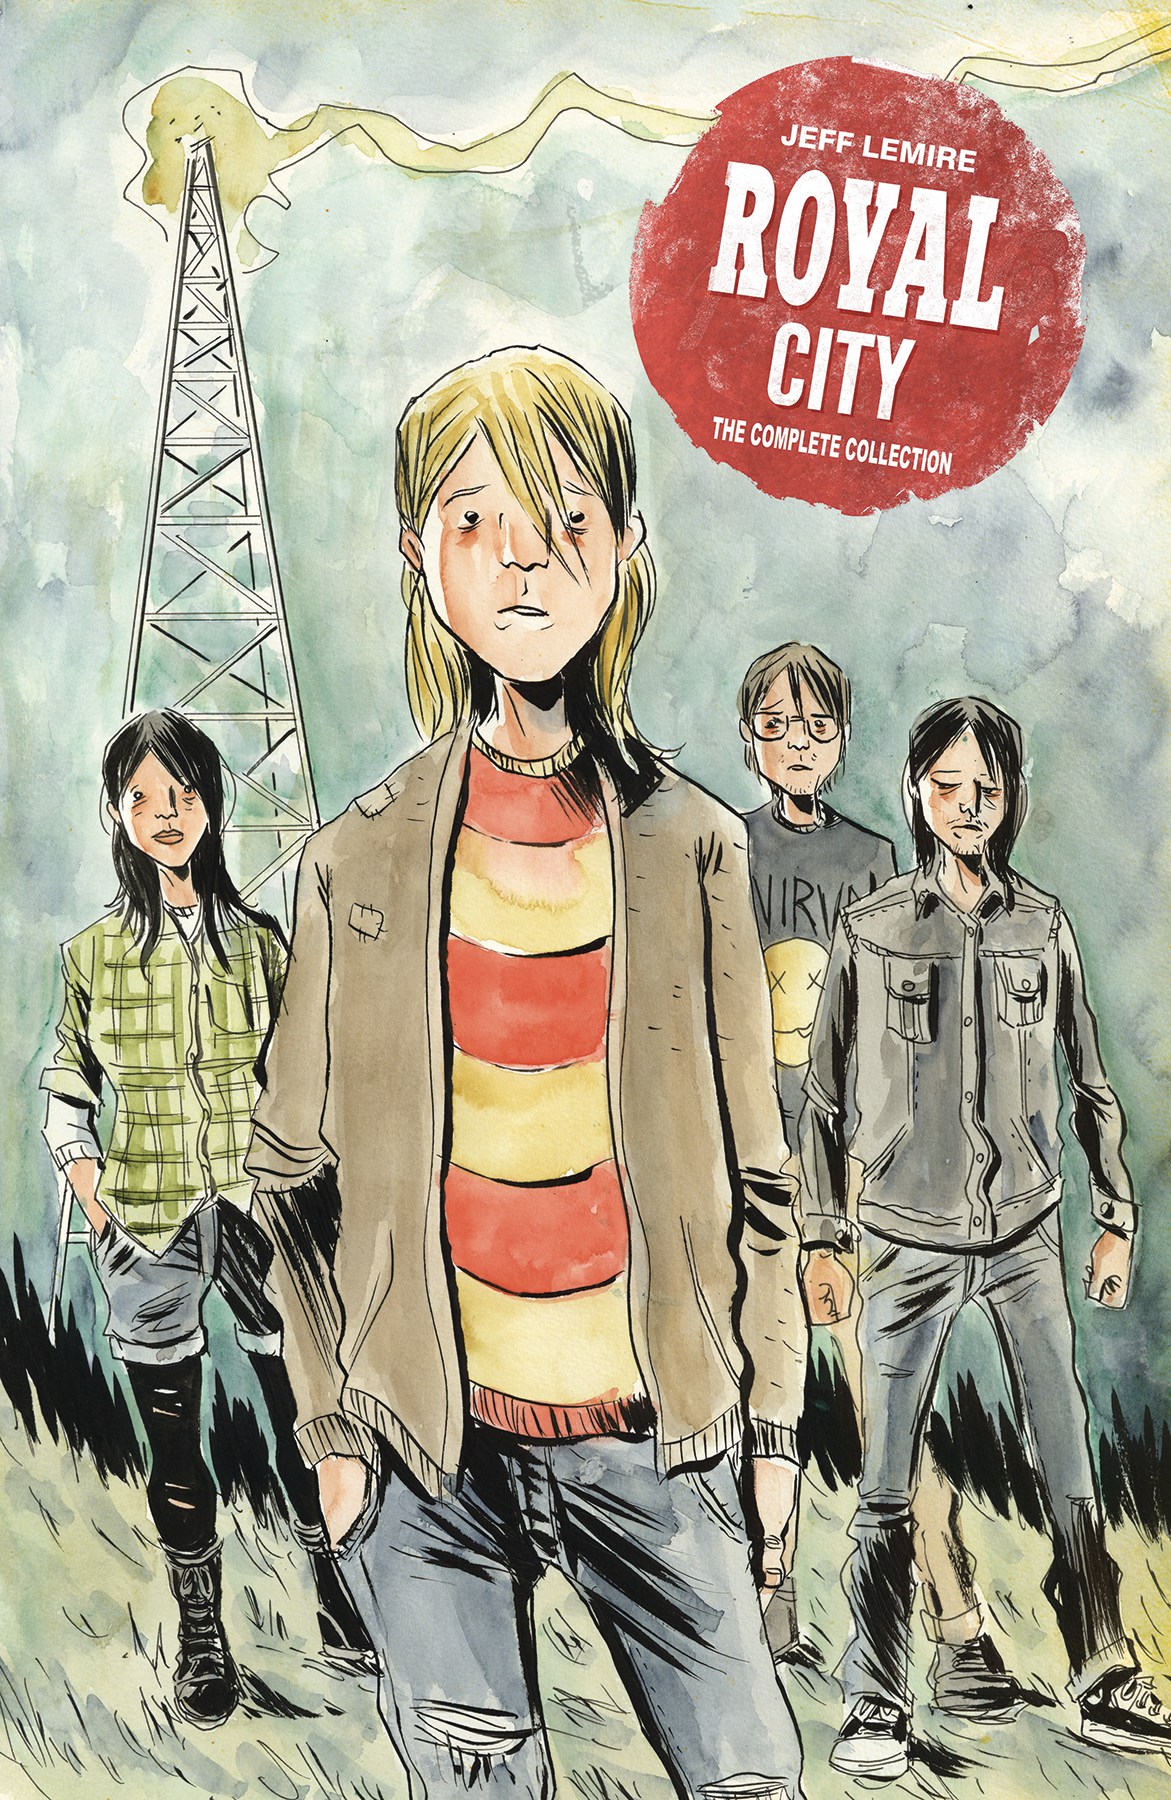 Royal City Hardcover Volume 1 Complete Collection (Mature)